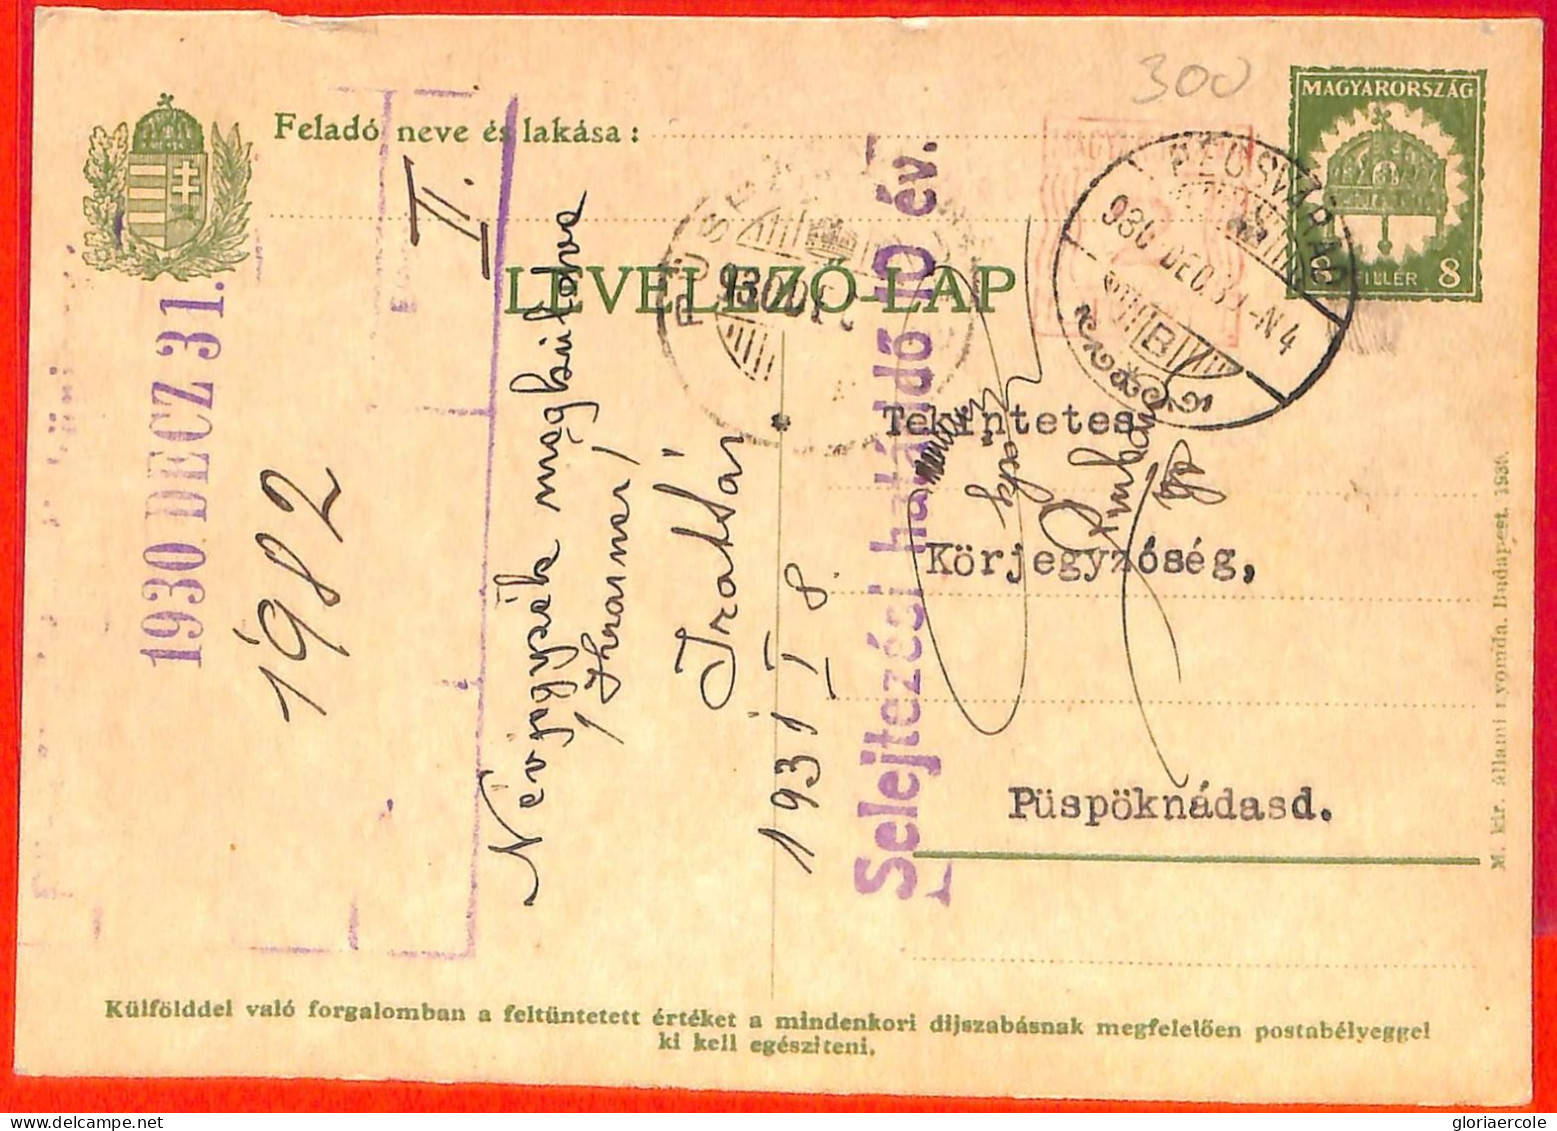 Aa1976 - HUNGARY - Postal History - STATIONERY CARD Added Mechanical Franking 1930 - Officials